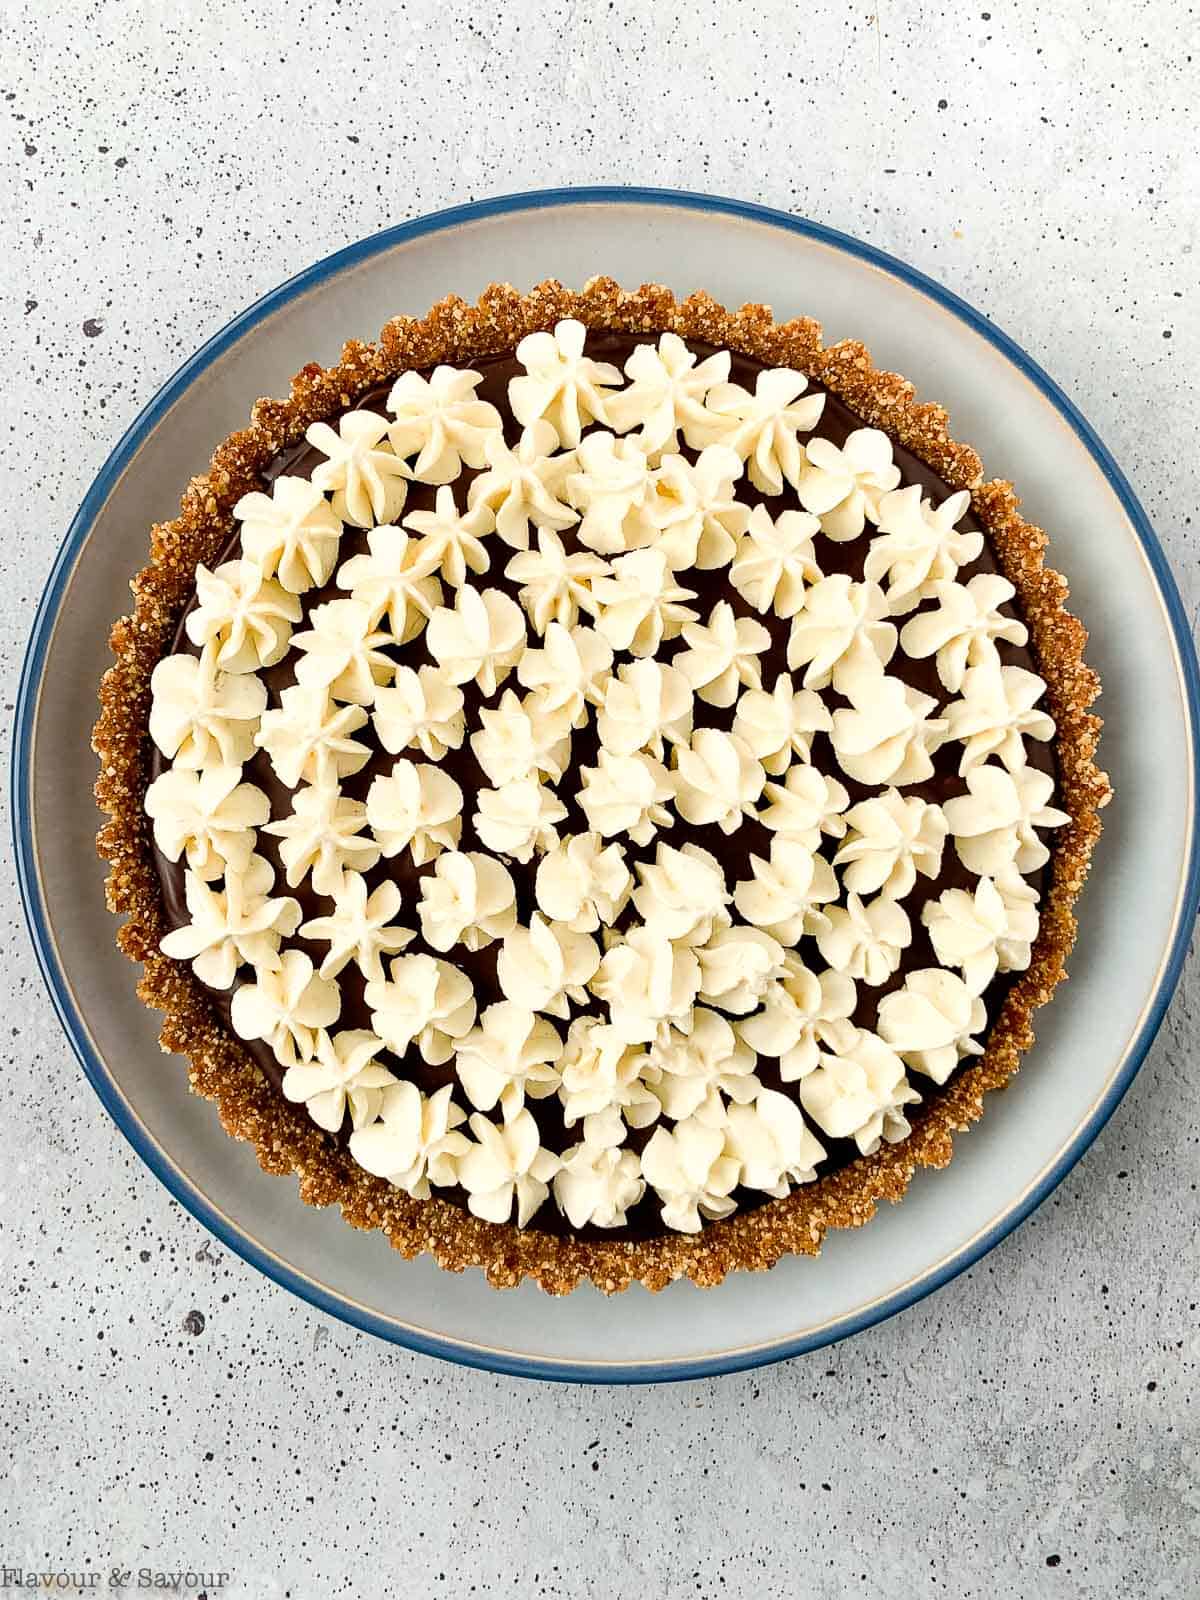 Overhead view of a chocolate ganache tart topped with piped whipped cream.